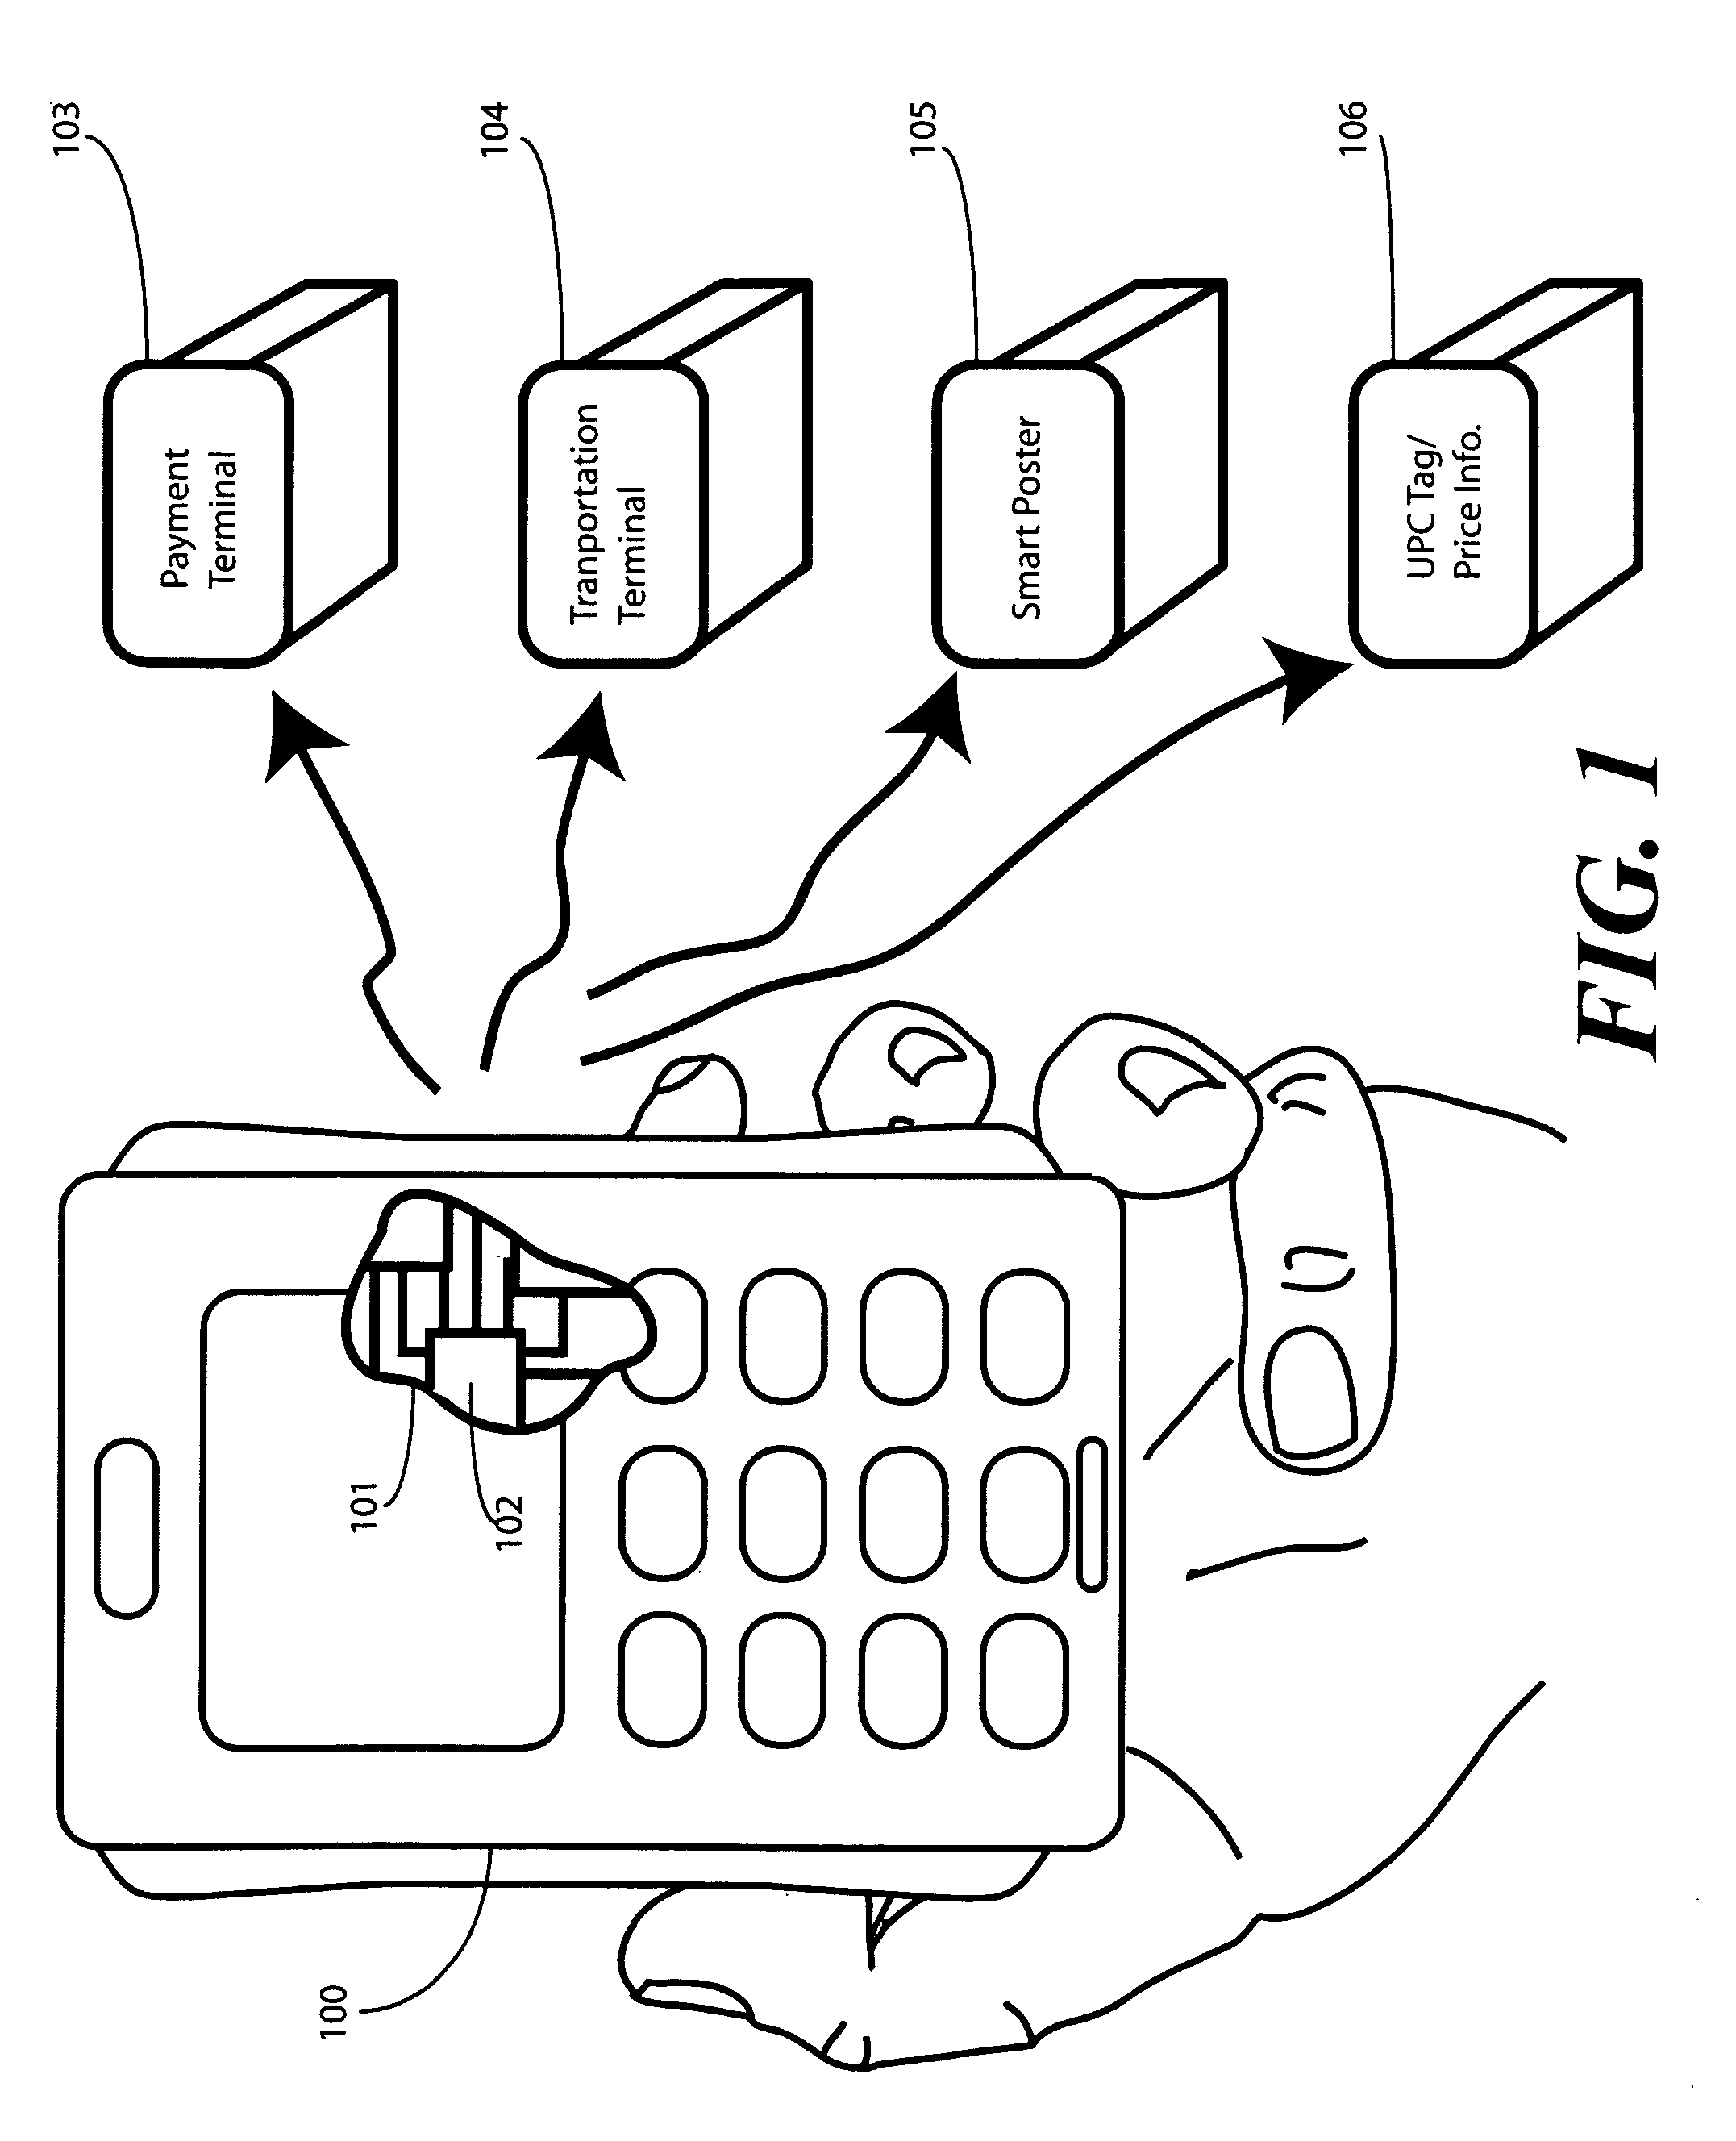 Method and apparatus for automatic near field communication application selection in an electronic device